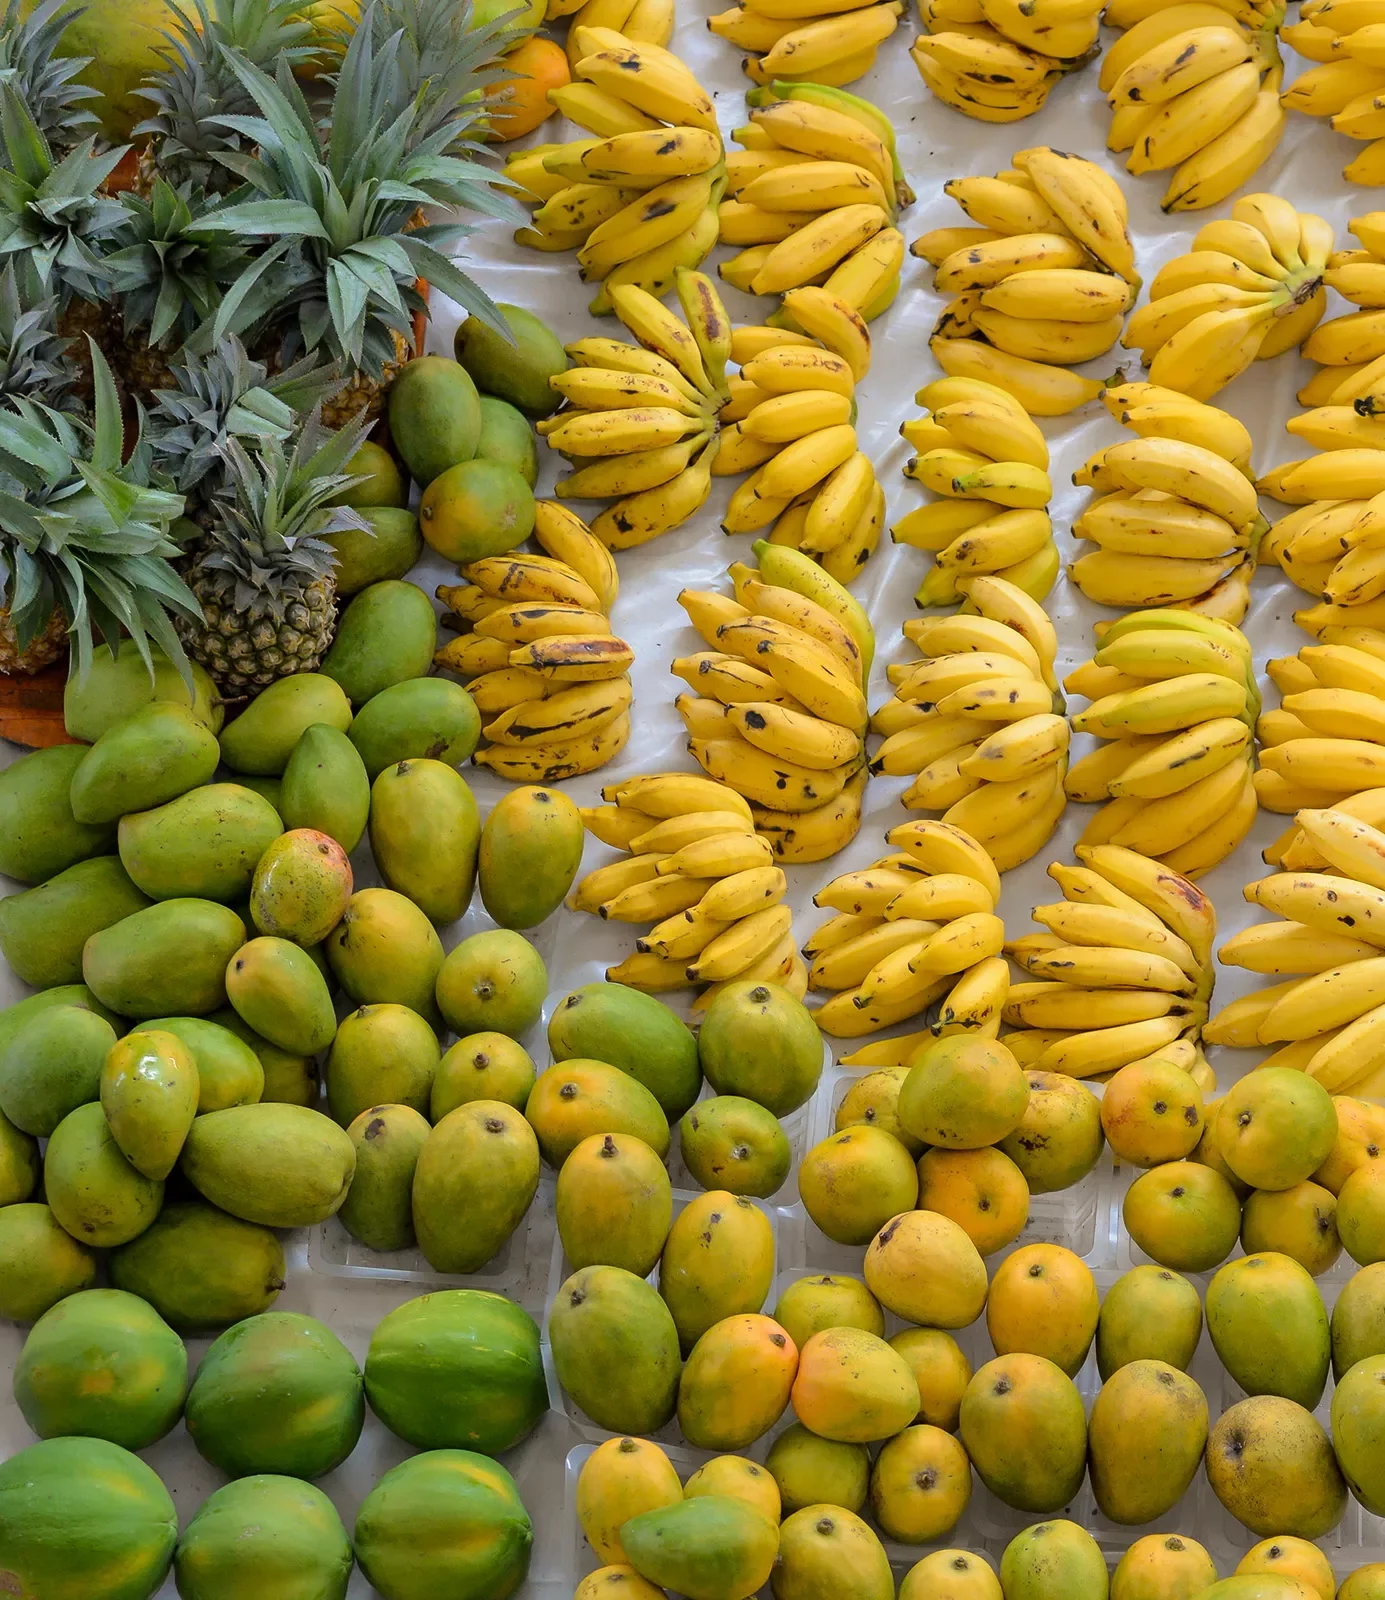 A collection of fresh fruits in Tahiti